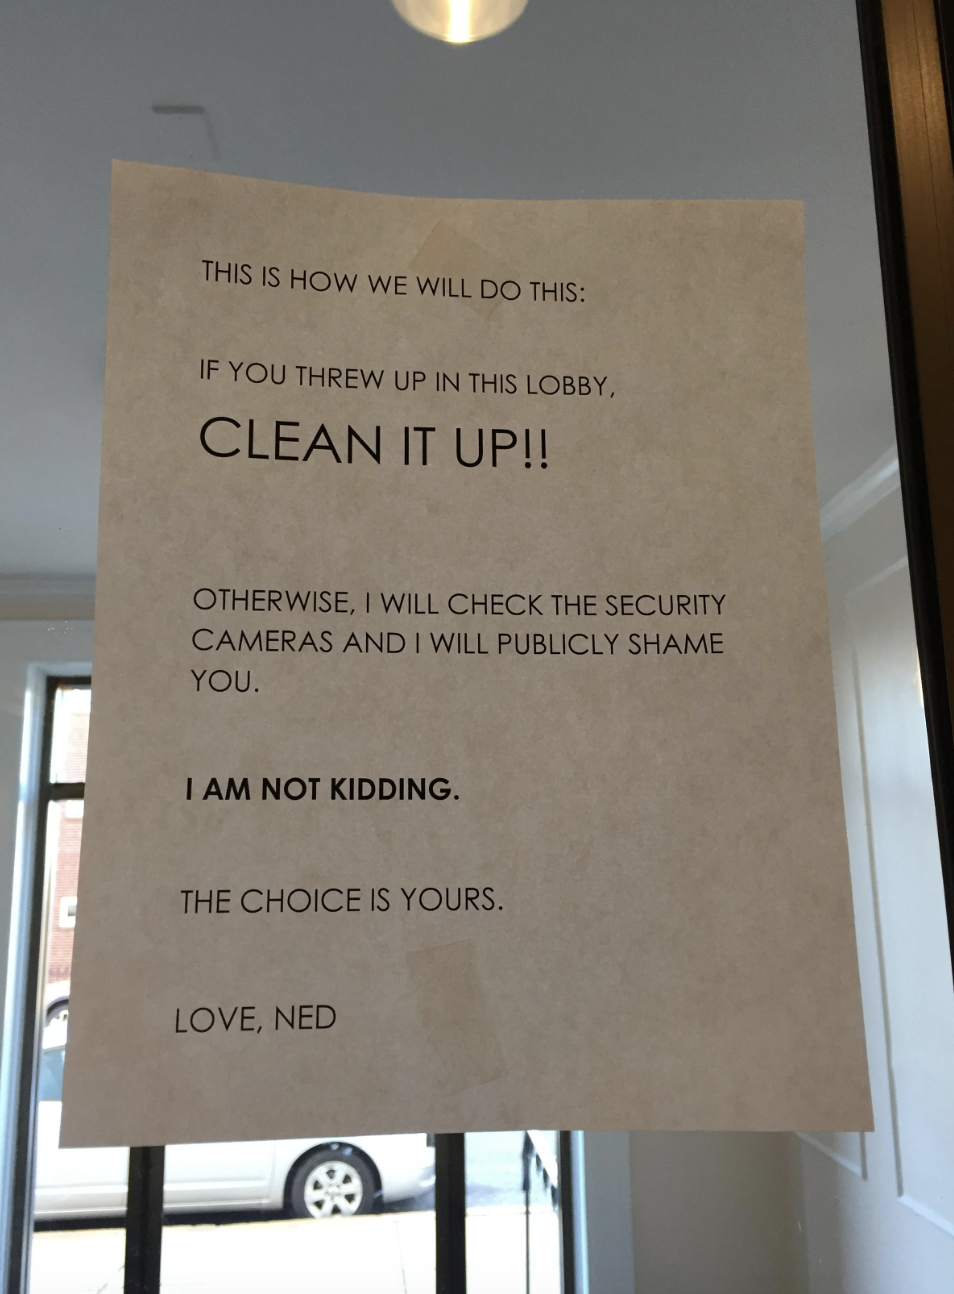 A stern warning sign taped to a door demands cleanliness in the lobby, threatening security camera review, signed by Ned